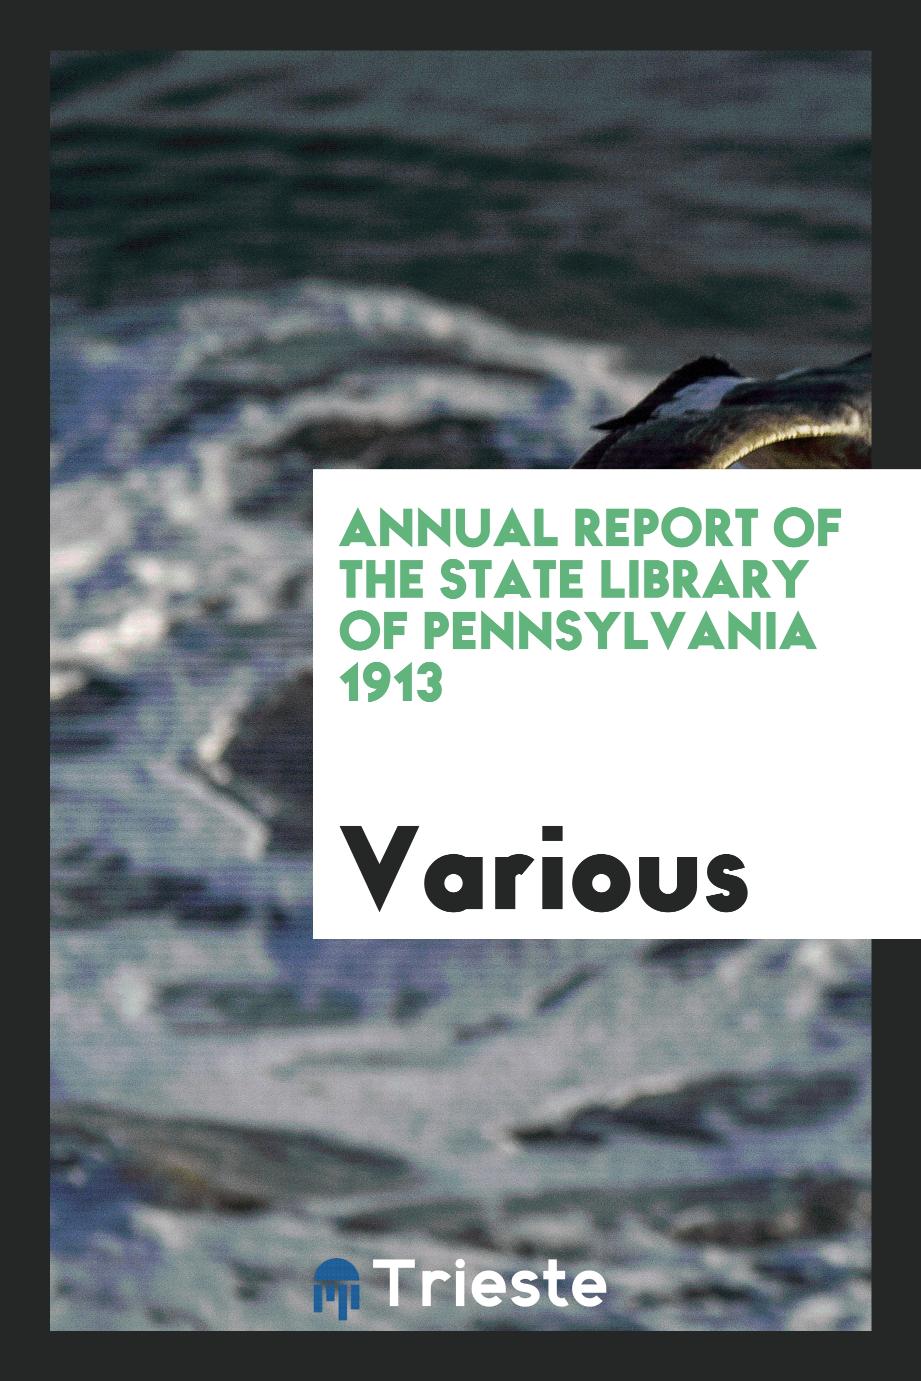 Annual Report of the State Library of Pennsylvania 1913